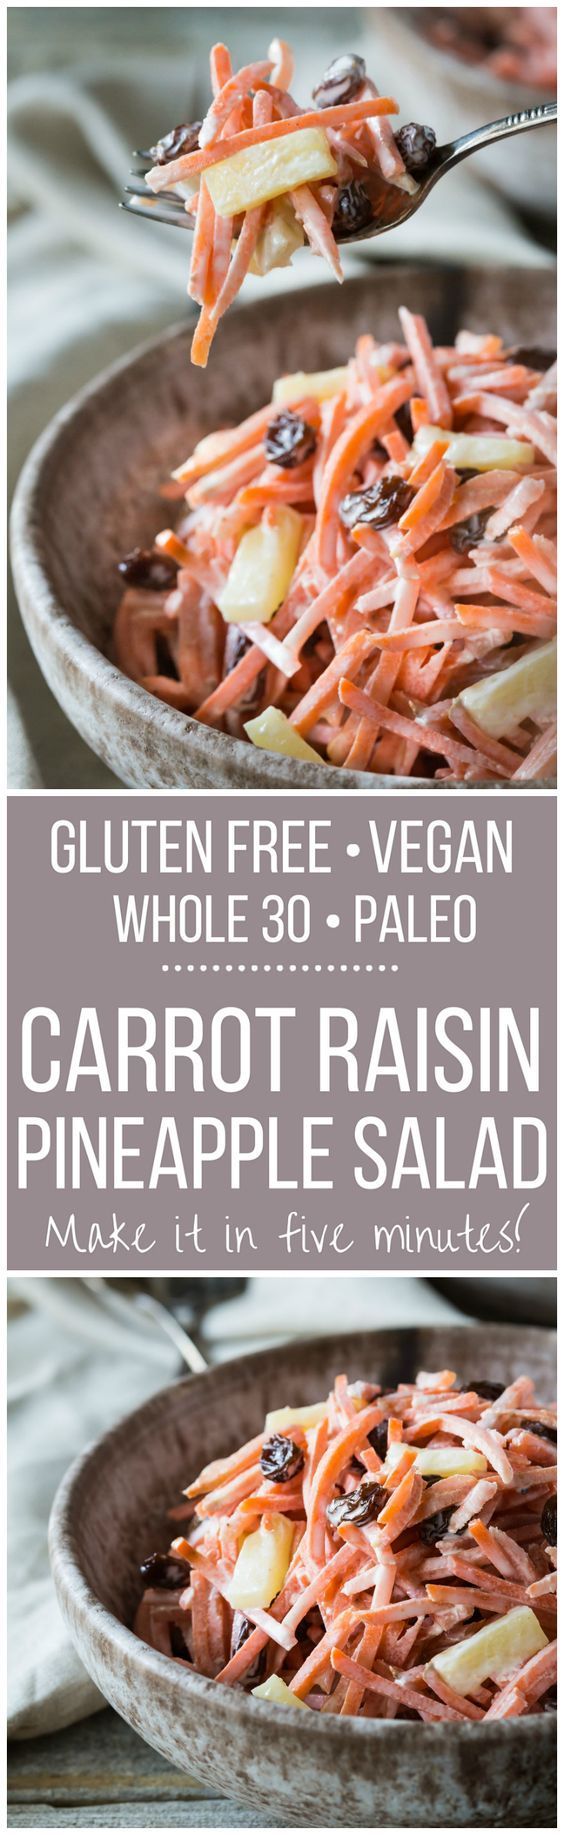 A very easy nutritious Paleo, Whole 30, and Gluten Free Carrot Raisin Pineapple Salad that requires no cooking and can be made in